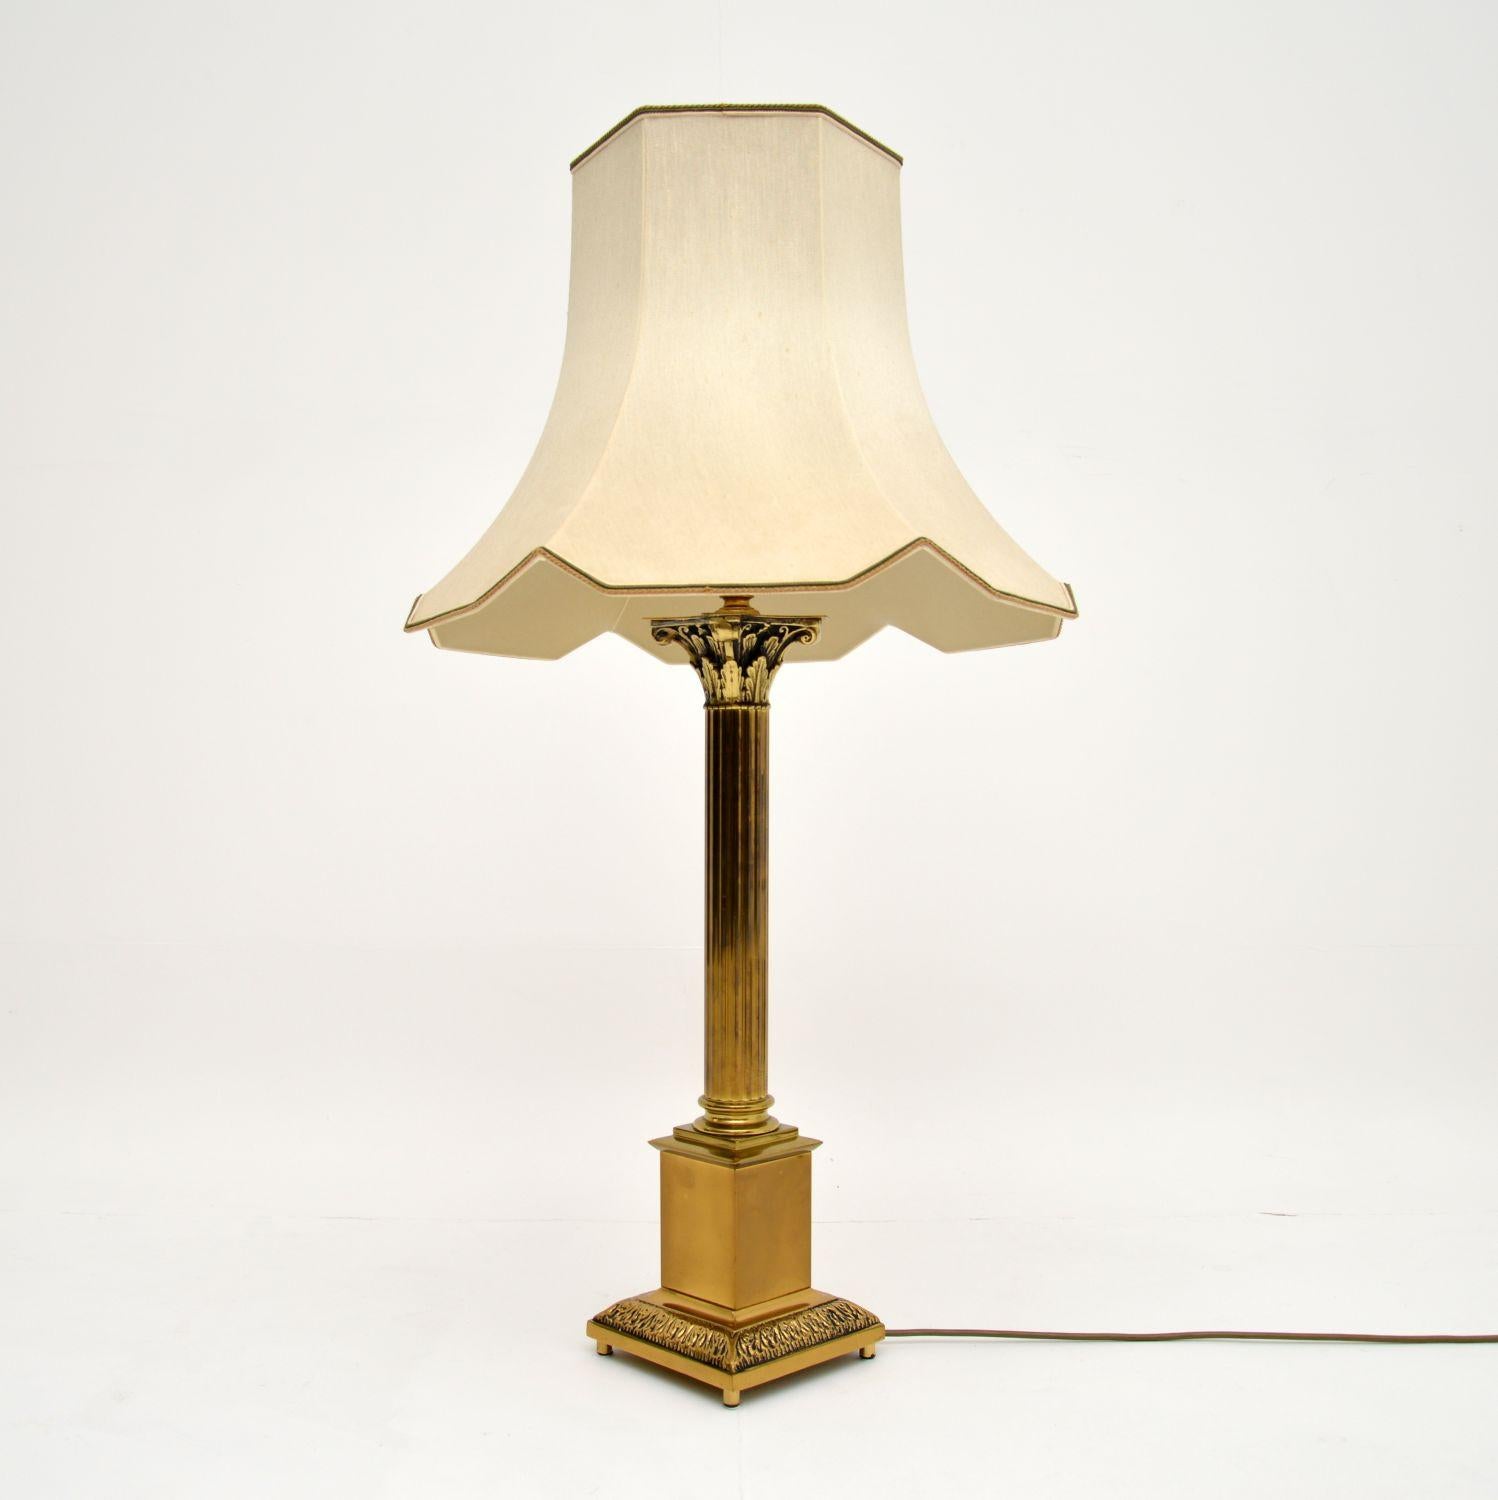 A large and impressive vintage brass table lamp, in the antique neoclassical style. This was made in England & it dates from around the 1950-60’s period.

The quality is amazing, this is very well made and beautifully designed in the style of a